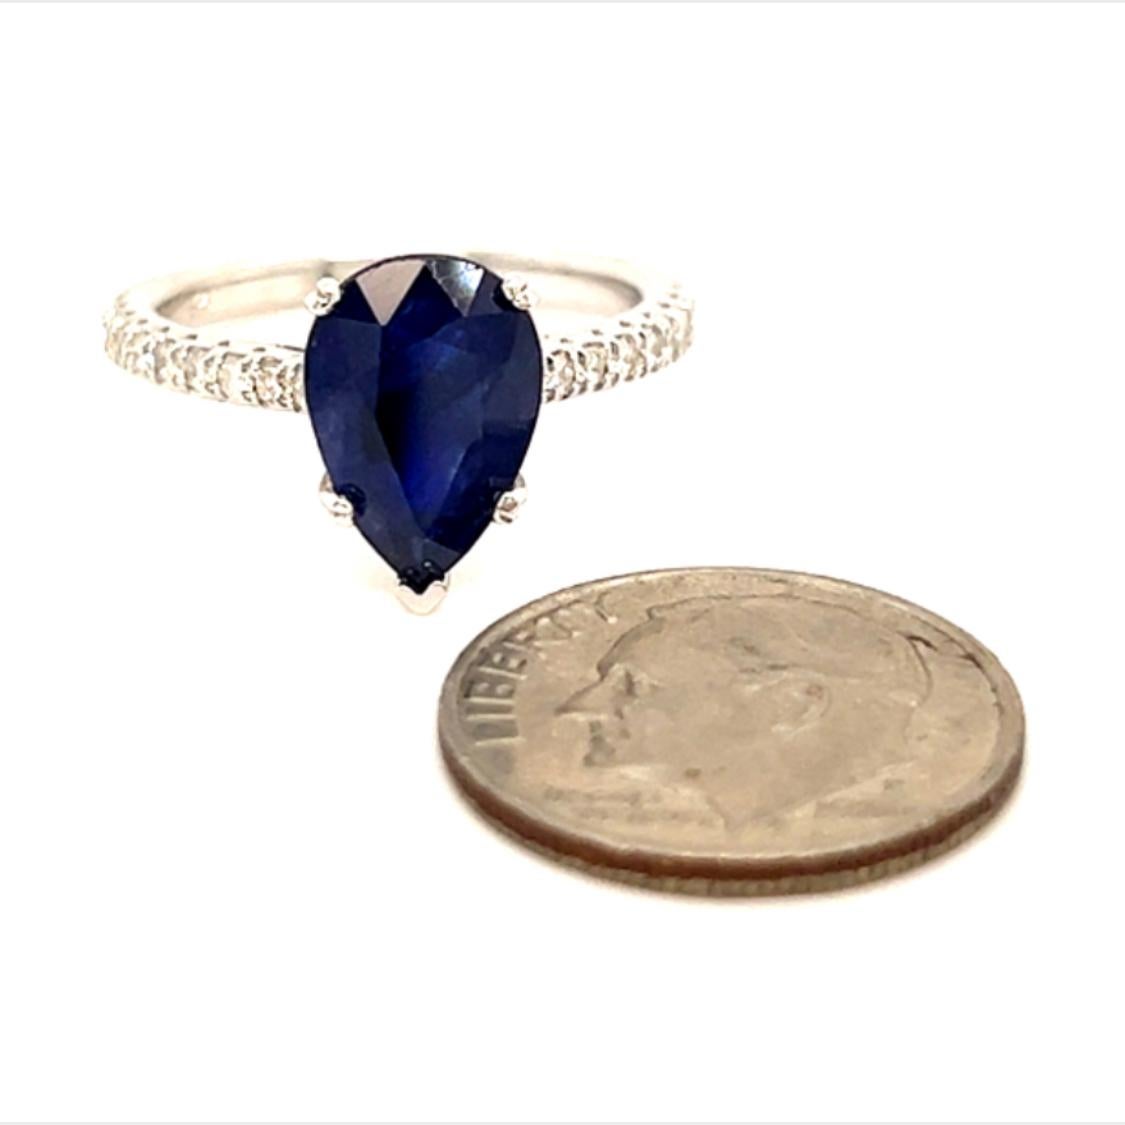 Sapphire Diamond Ring Size 6.5 14k Gold 2.77 TCW Certified For Sale 2